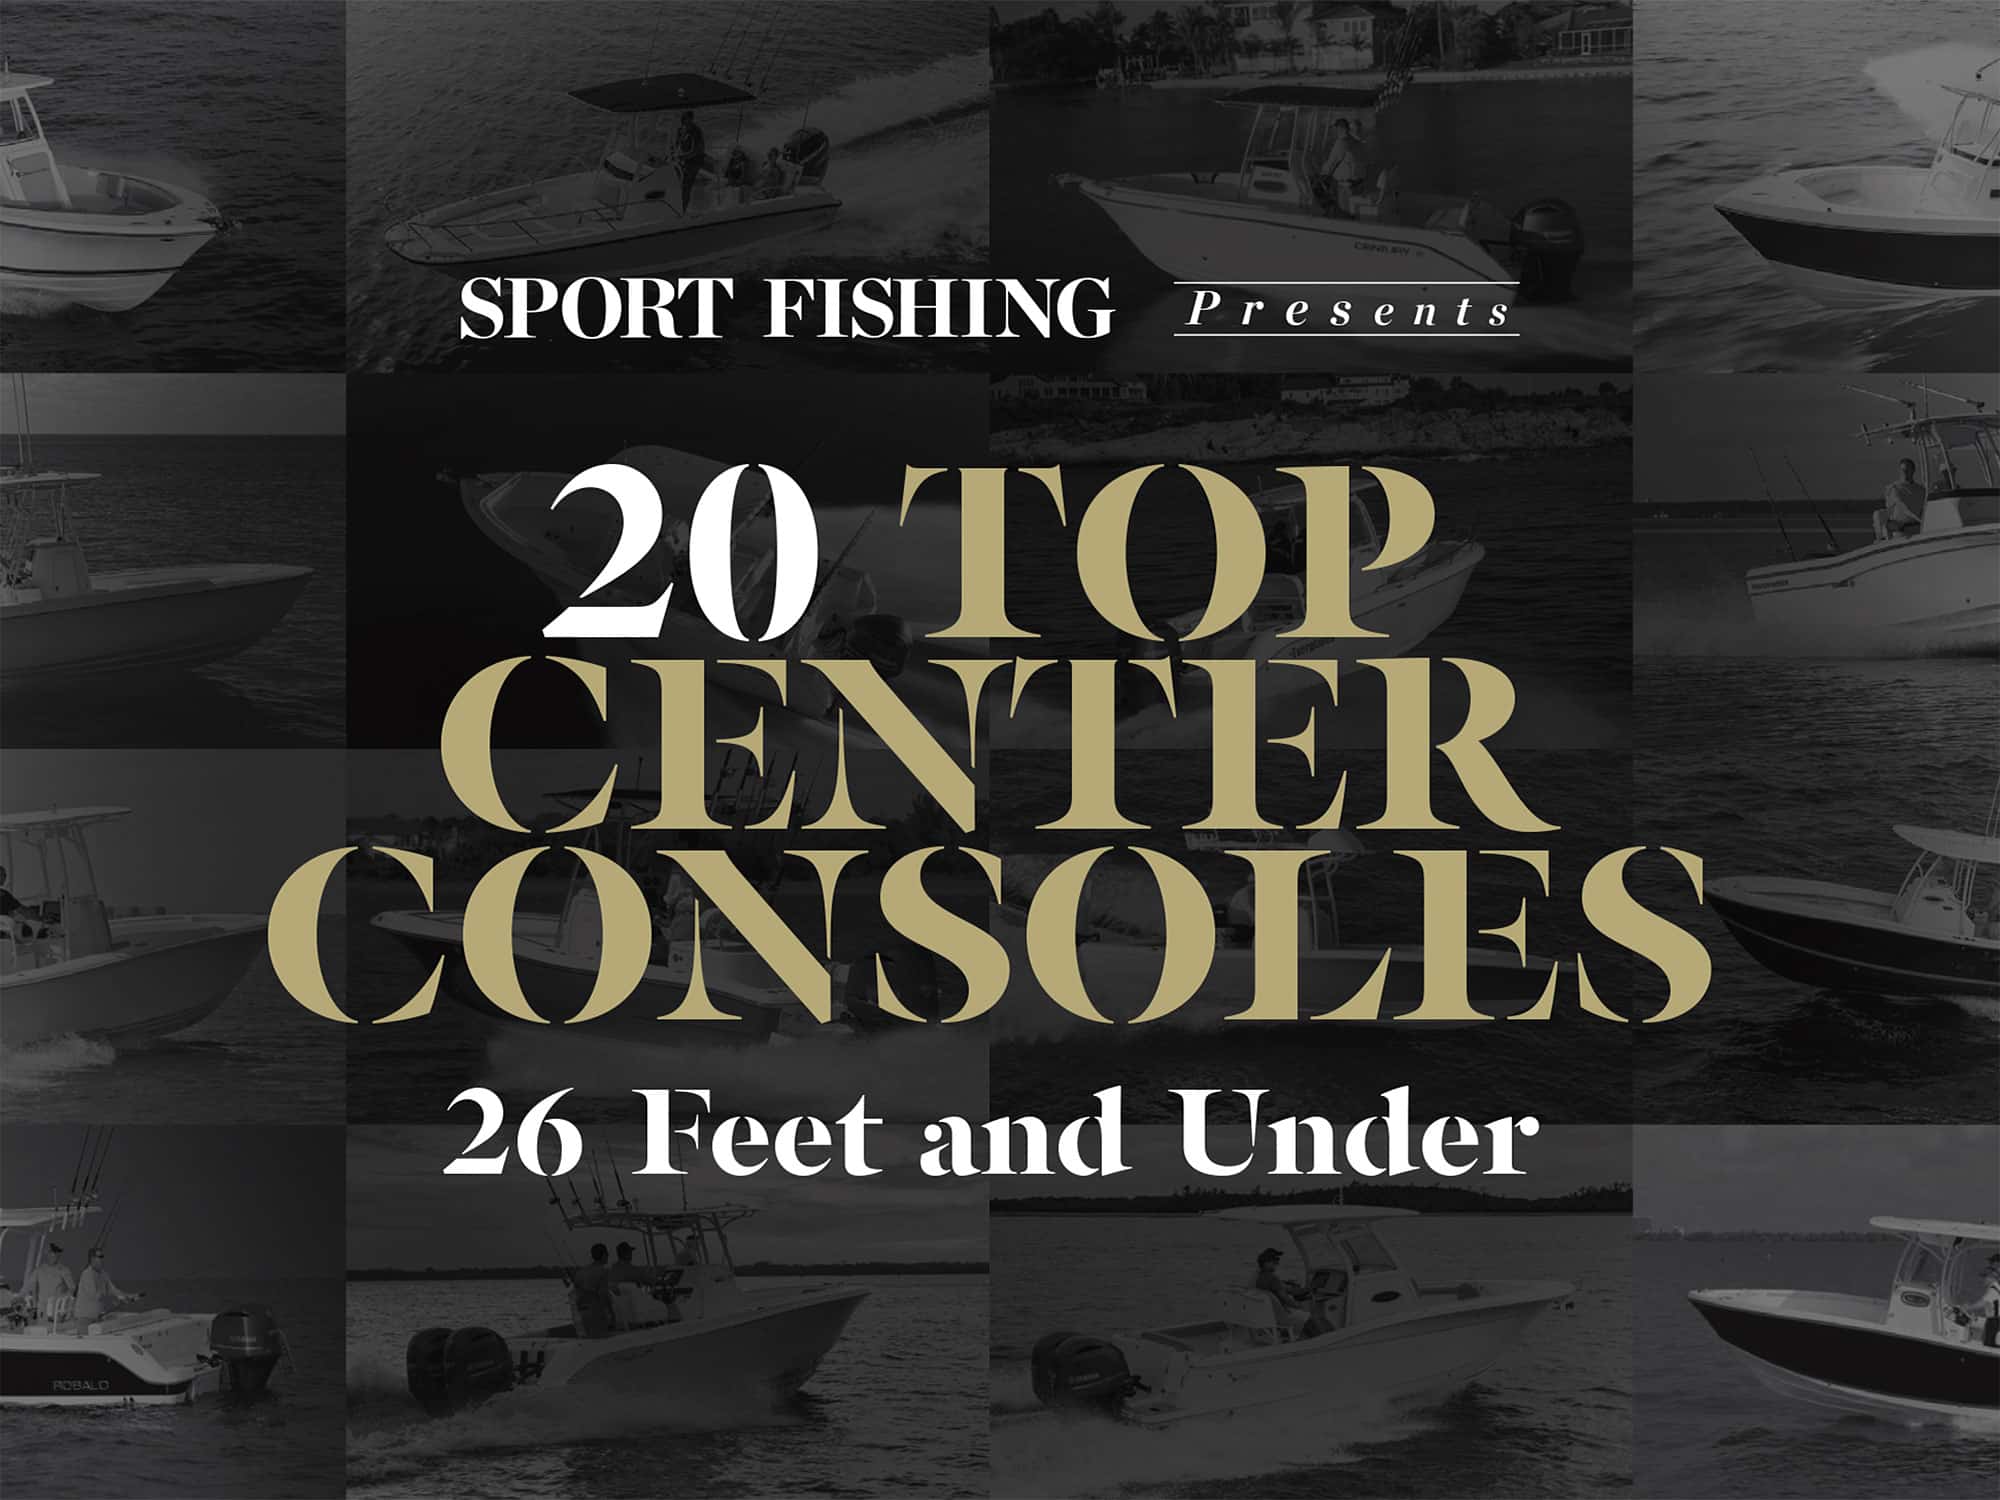 Best Collapsible Fishing Rod Under 30 in 2021 - Top Category Product! 